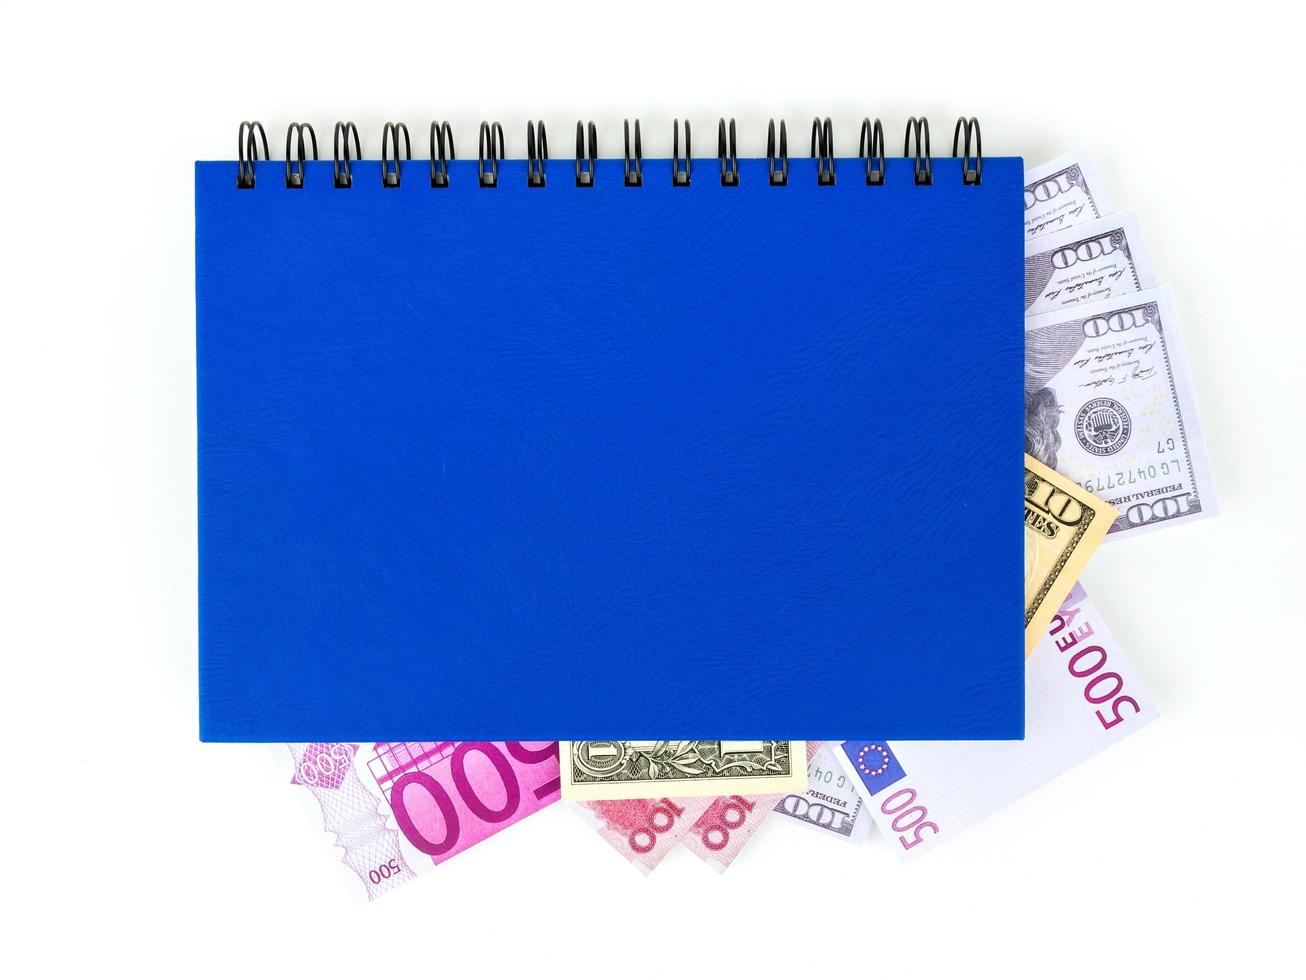 Blue book with nested international banknotes, isolated on white background. Stash of money concept, Business ideas photo